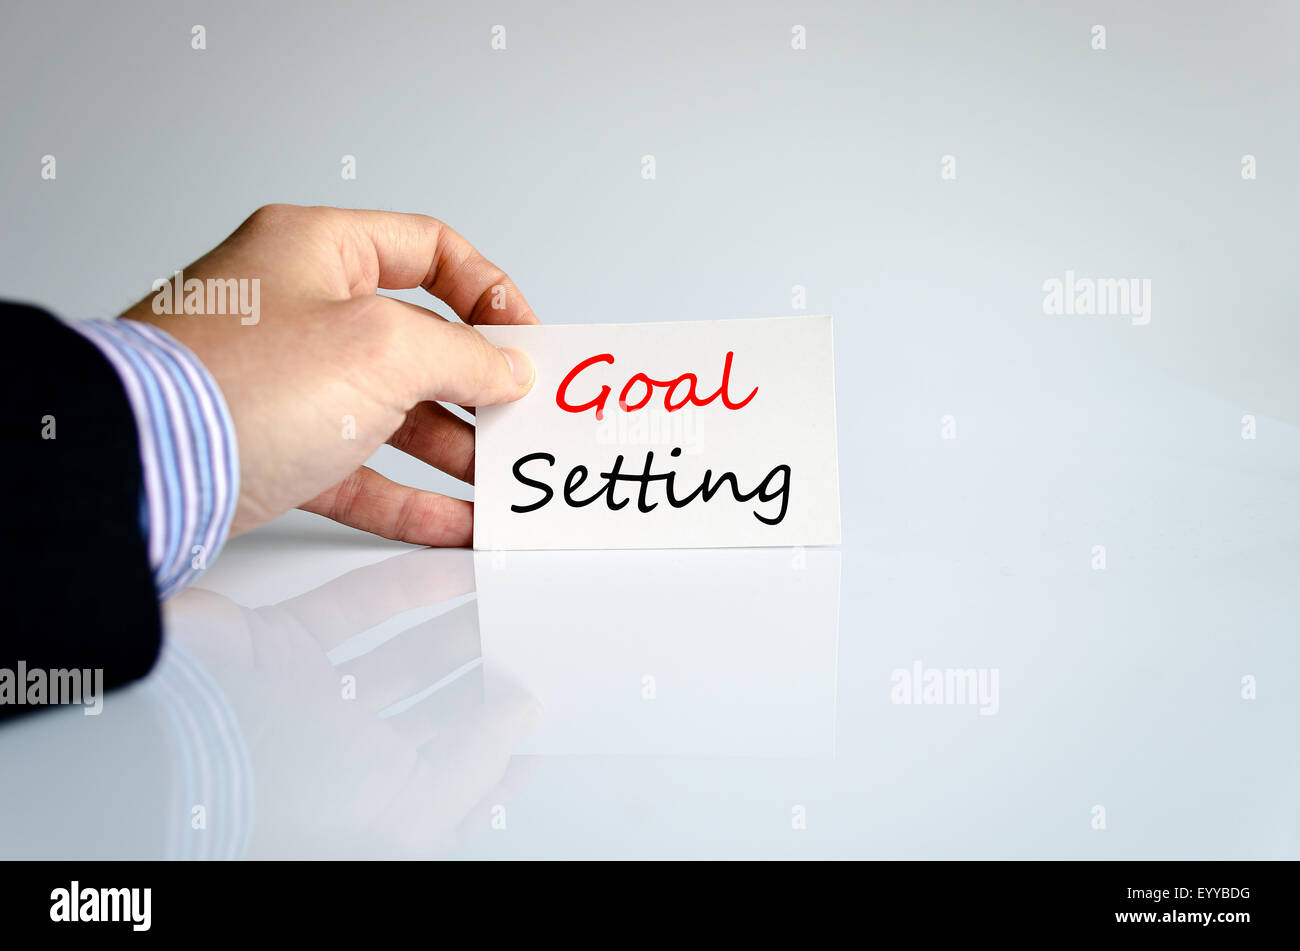 Goal setting text concept isolated over white background Stock Photo